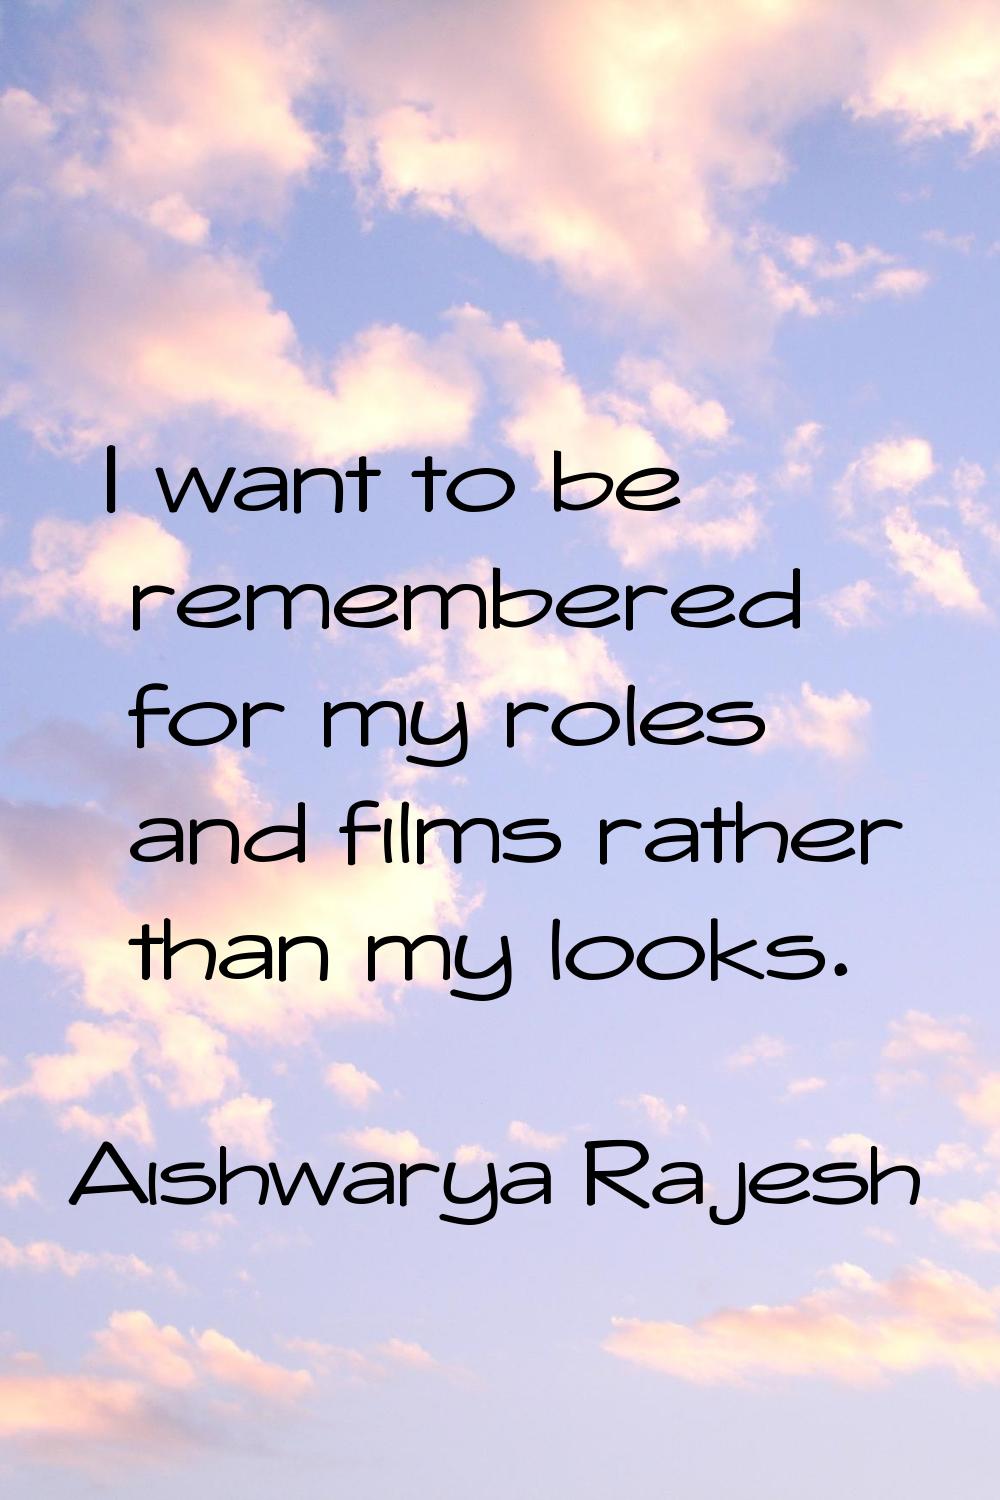 I want to be remembered for my roles and films rather than my looks.